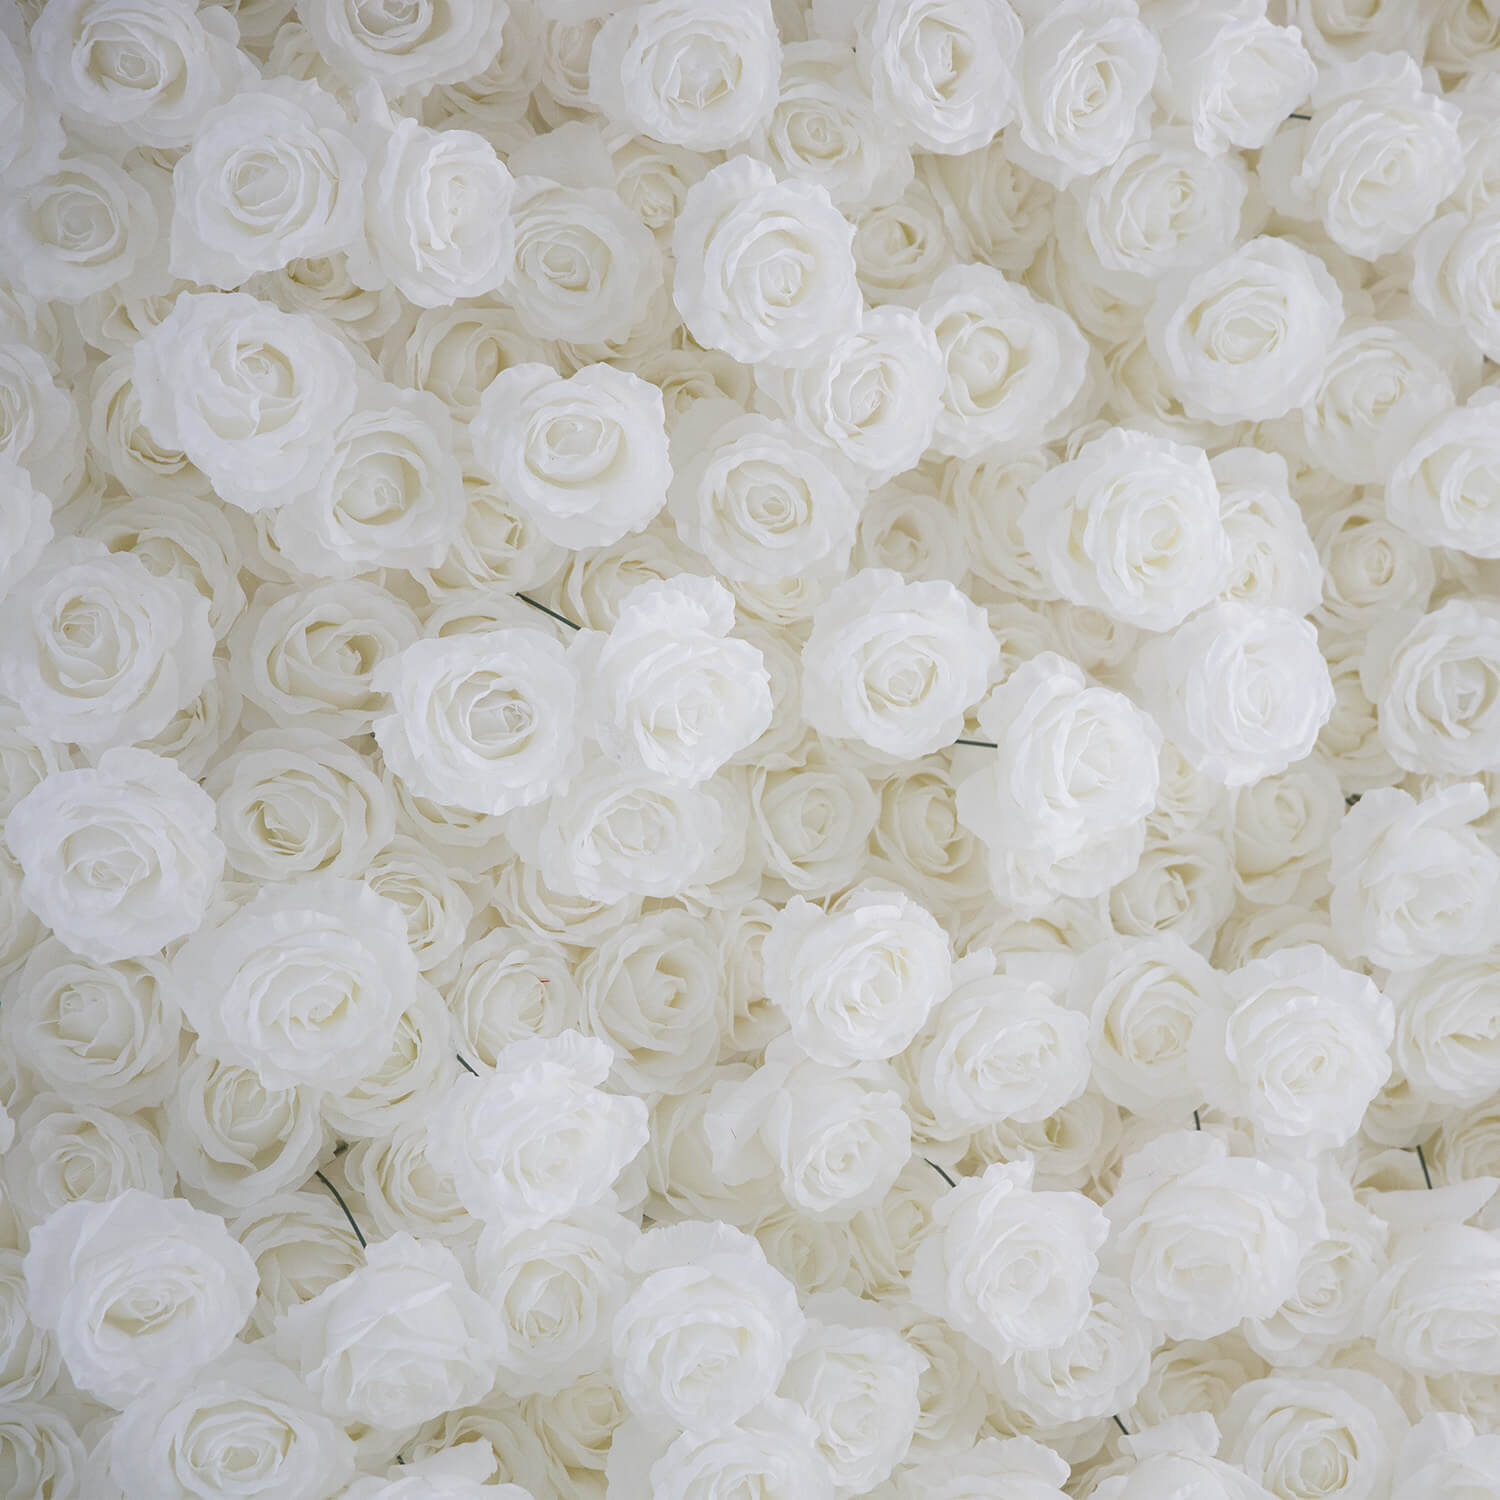 Full White Roses Fabric Artificial Flower Wall For Wedding Arrangement Event-ubackdrop